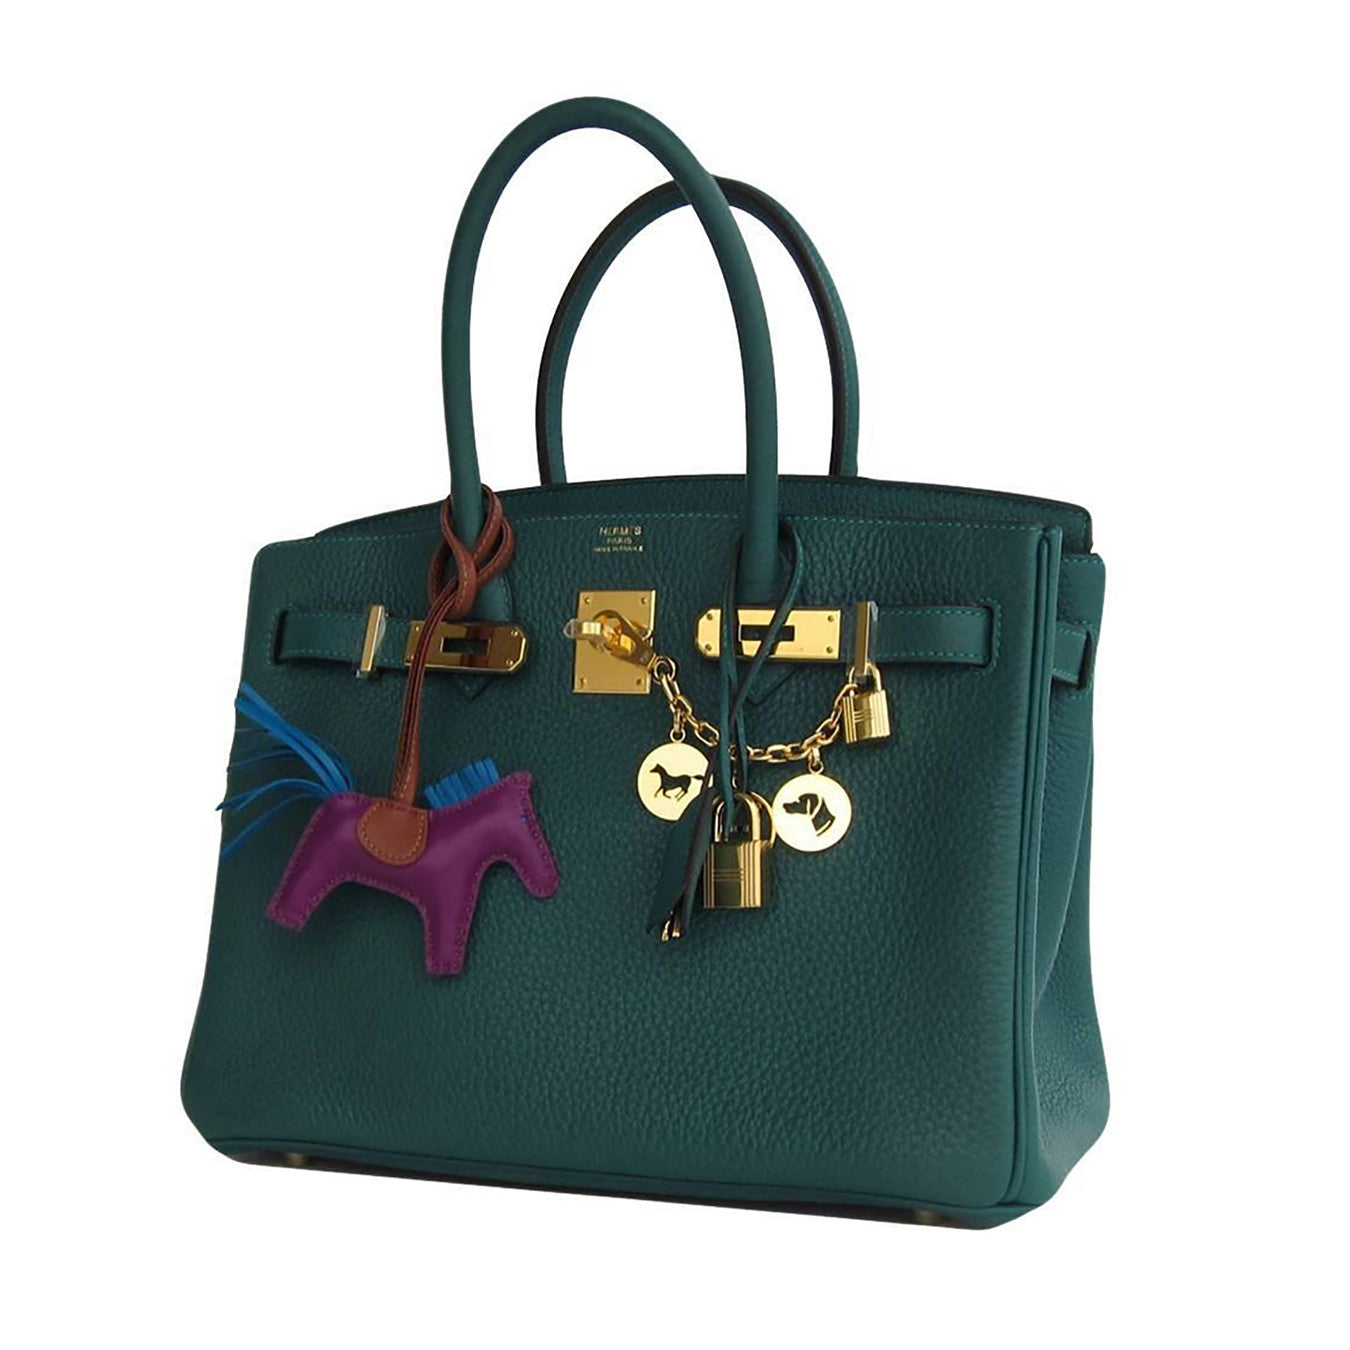 The most beautifully breathtaking emerald green bag from Hermes